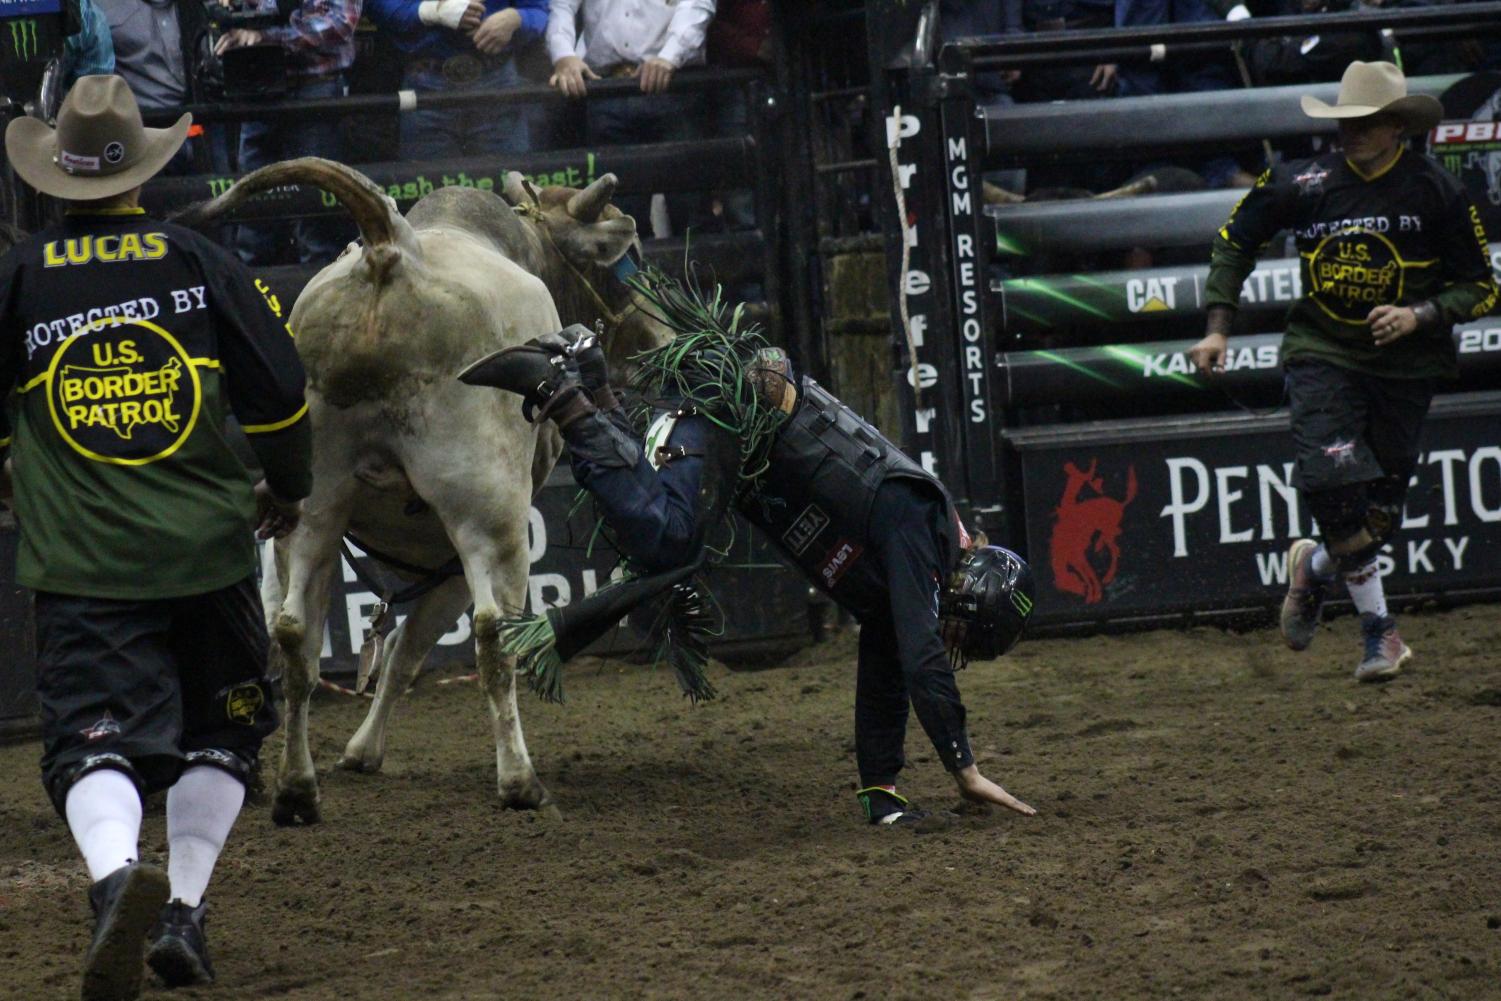 Cowboys+%26+Covid-19%3A+Professional+Bull+Riding+Event+Hosted+in+Kansas+City